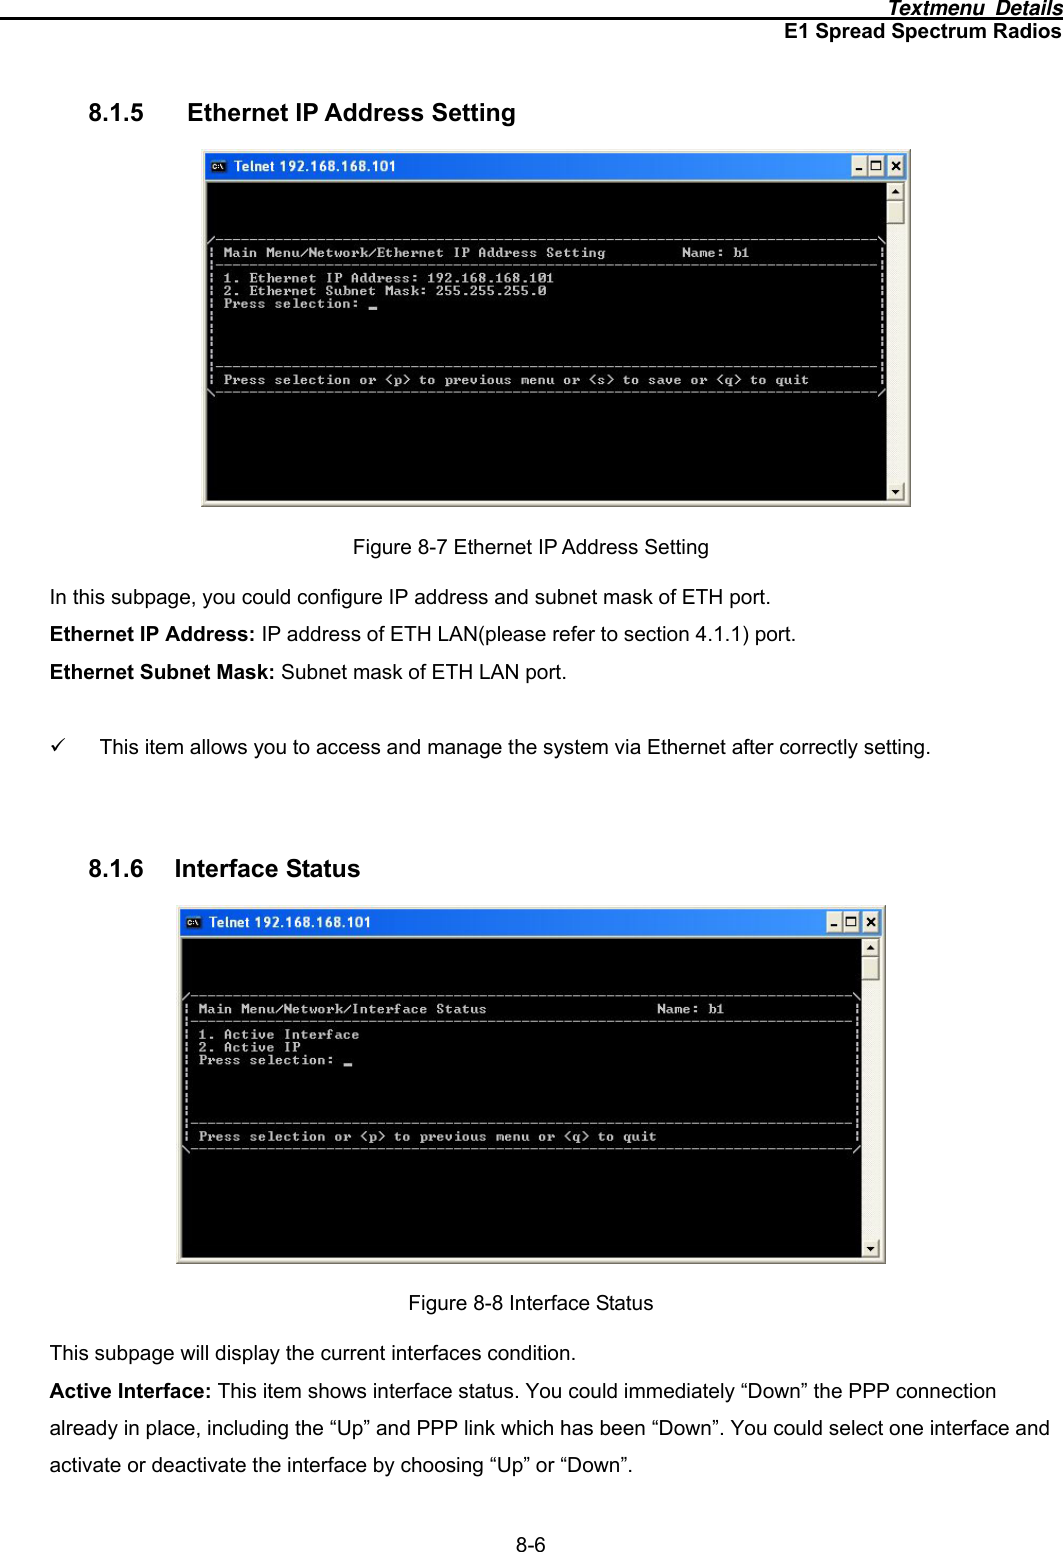                                                                                      Textmenu Details E1 Spread Spectrum Radios 8-6 8.1.5  Ethernet IP Address Setting  Figure 8-7 Ethernet IP Address Setting In this subpage, you could configure IP address and subnet mask of ETH port. Ethernet IP Address: IP address of ETH LAN(please refer to section 4.1.1) port. Ethernet Subnet Mask: Subnet mask of ETH LAN port.  9  This item allows you to access and manage the system via Ethernet after correctly setting.   8.1.6 Interface Status  Figure 8-8 Interface Status This subpage will display the current interfaces condition. Active Interface: This item shows interface status. You could immediately “Down” the PPP connection already in place, including the “Up” and PPP link which has been “Down”. You could select one interface and activate or deactivate the interface by choosing “Up” or “Down”. 